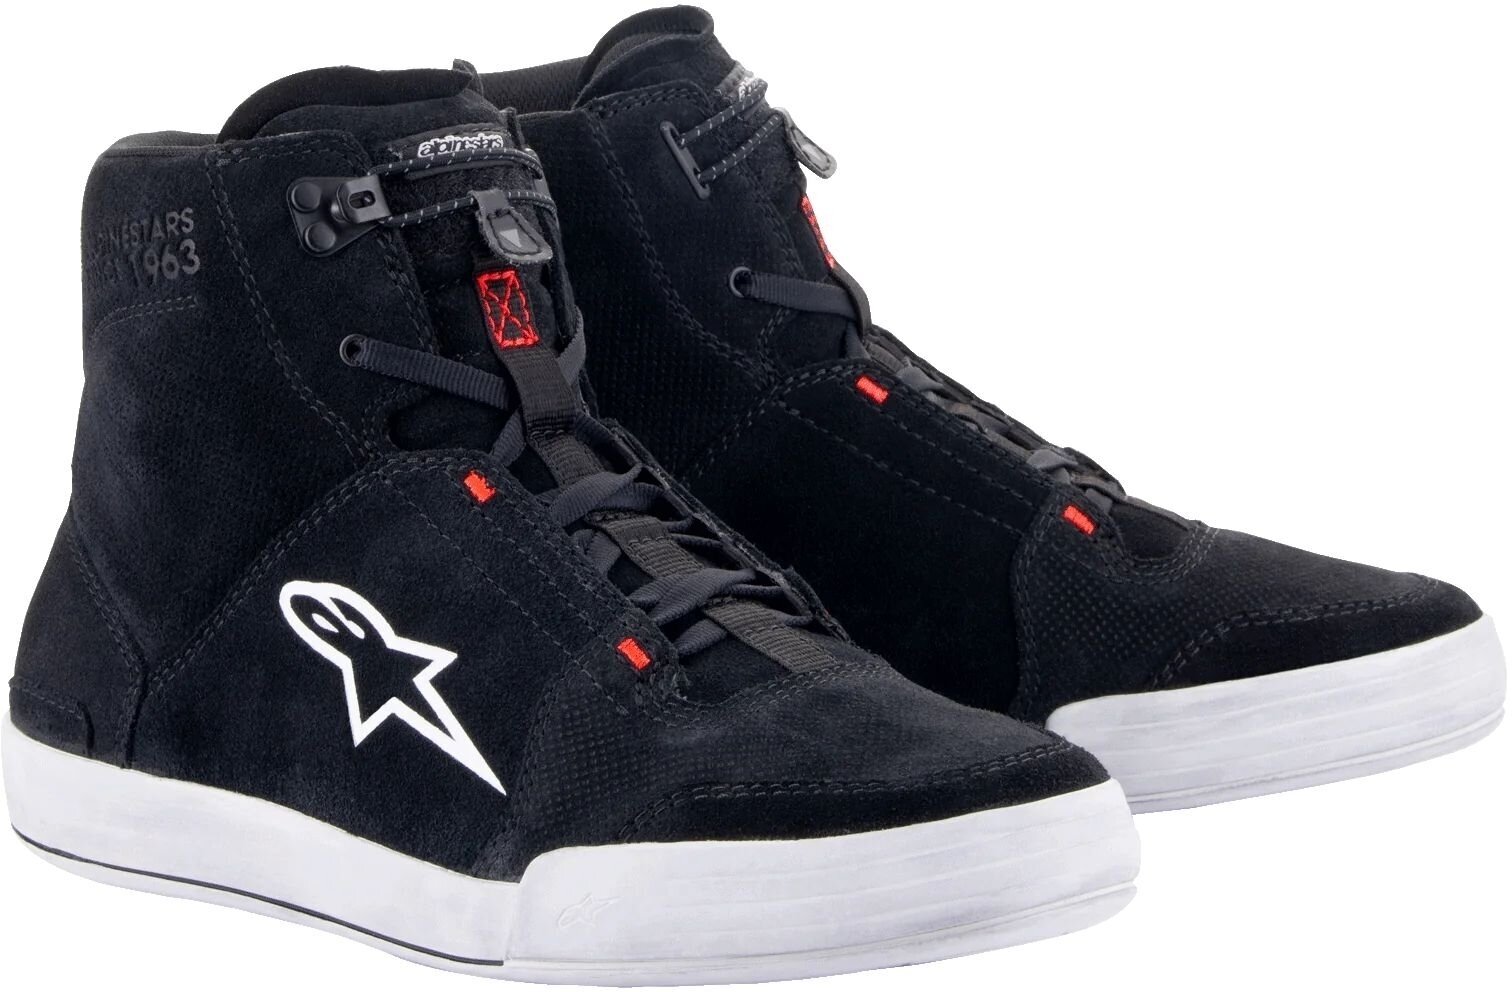 Topánky Alpinestars Chrome Shoes Black/Cool Gray/Red Fluo 39 Topánky